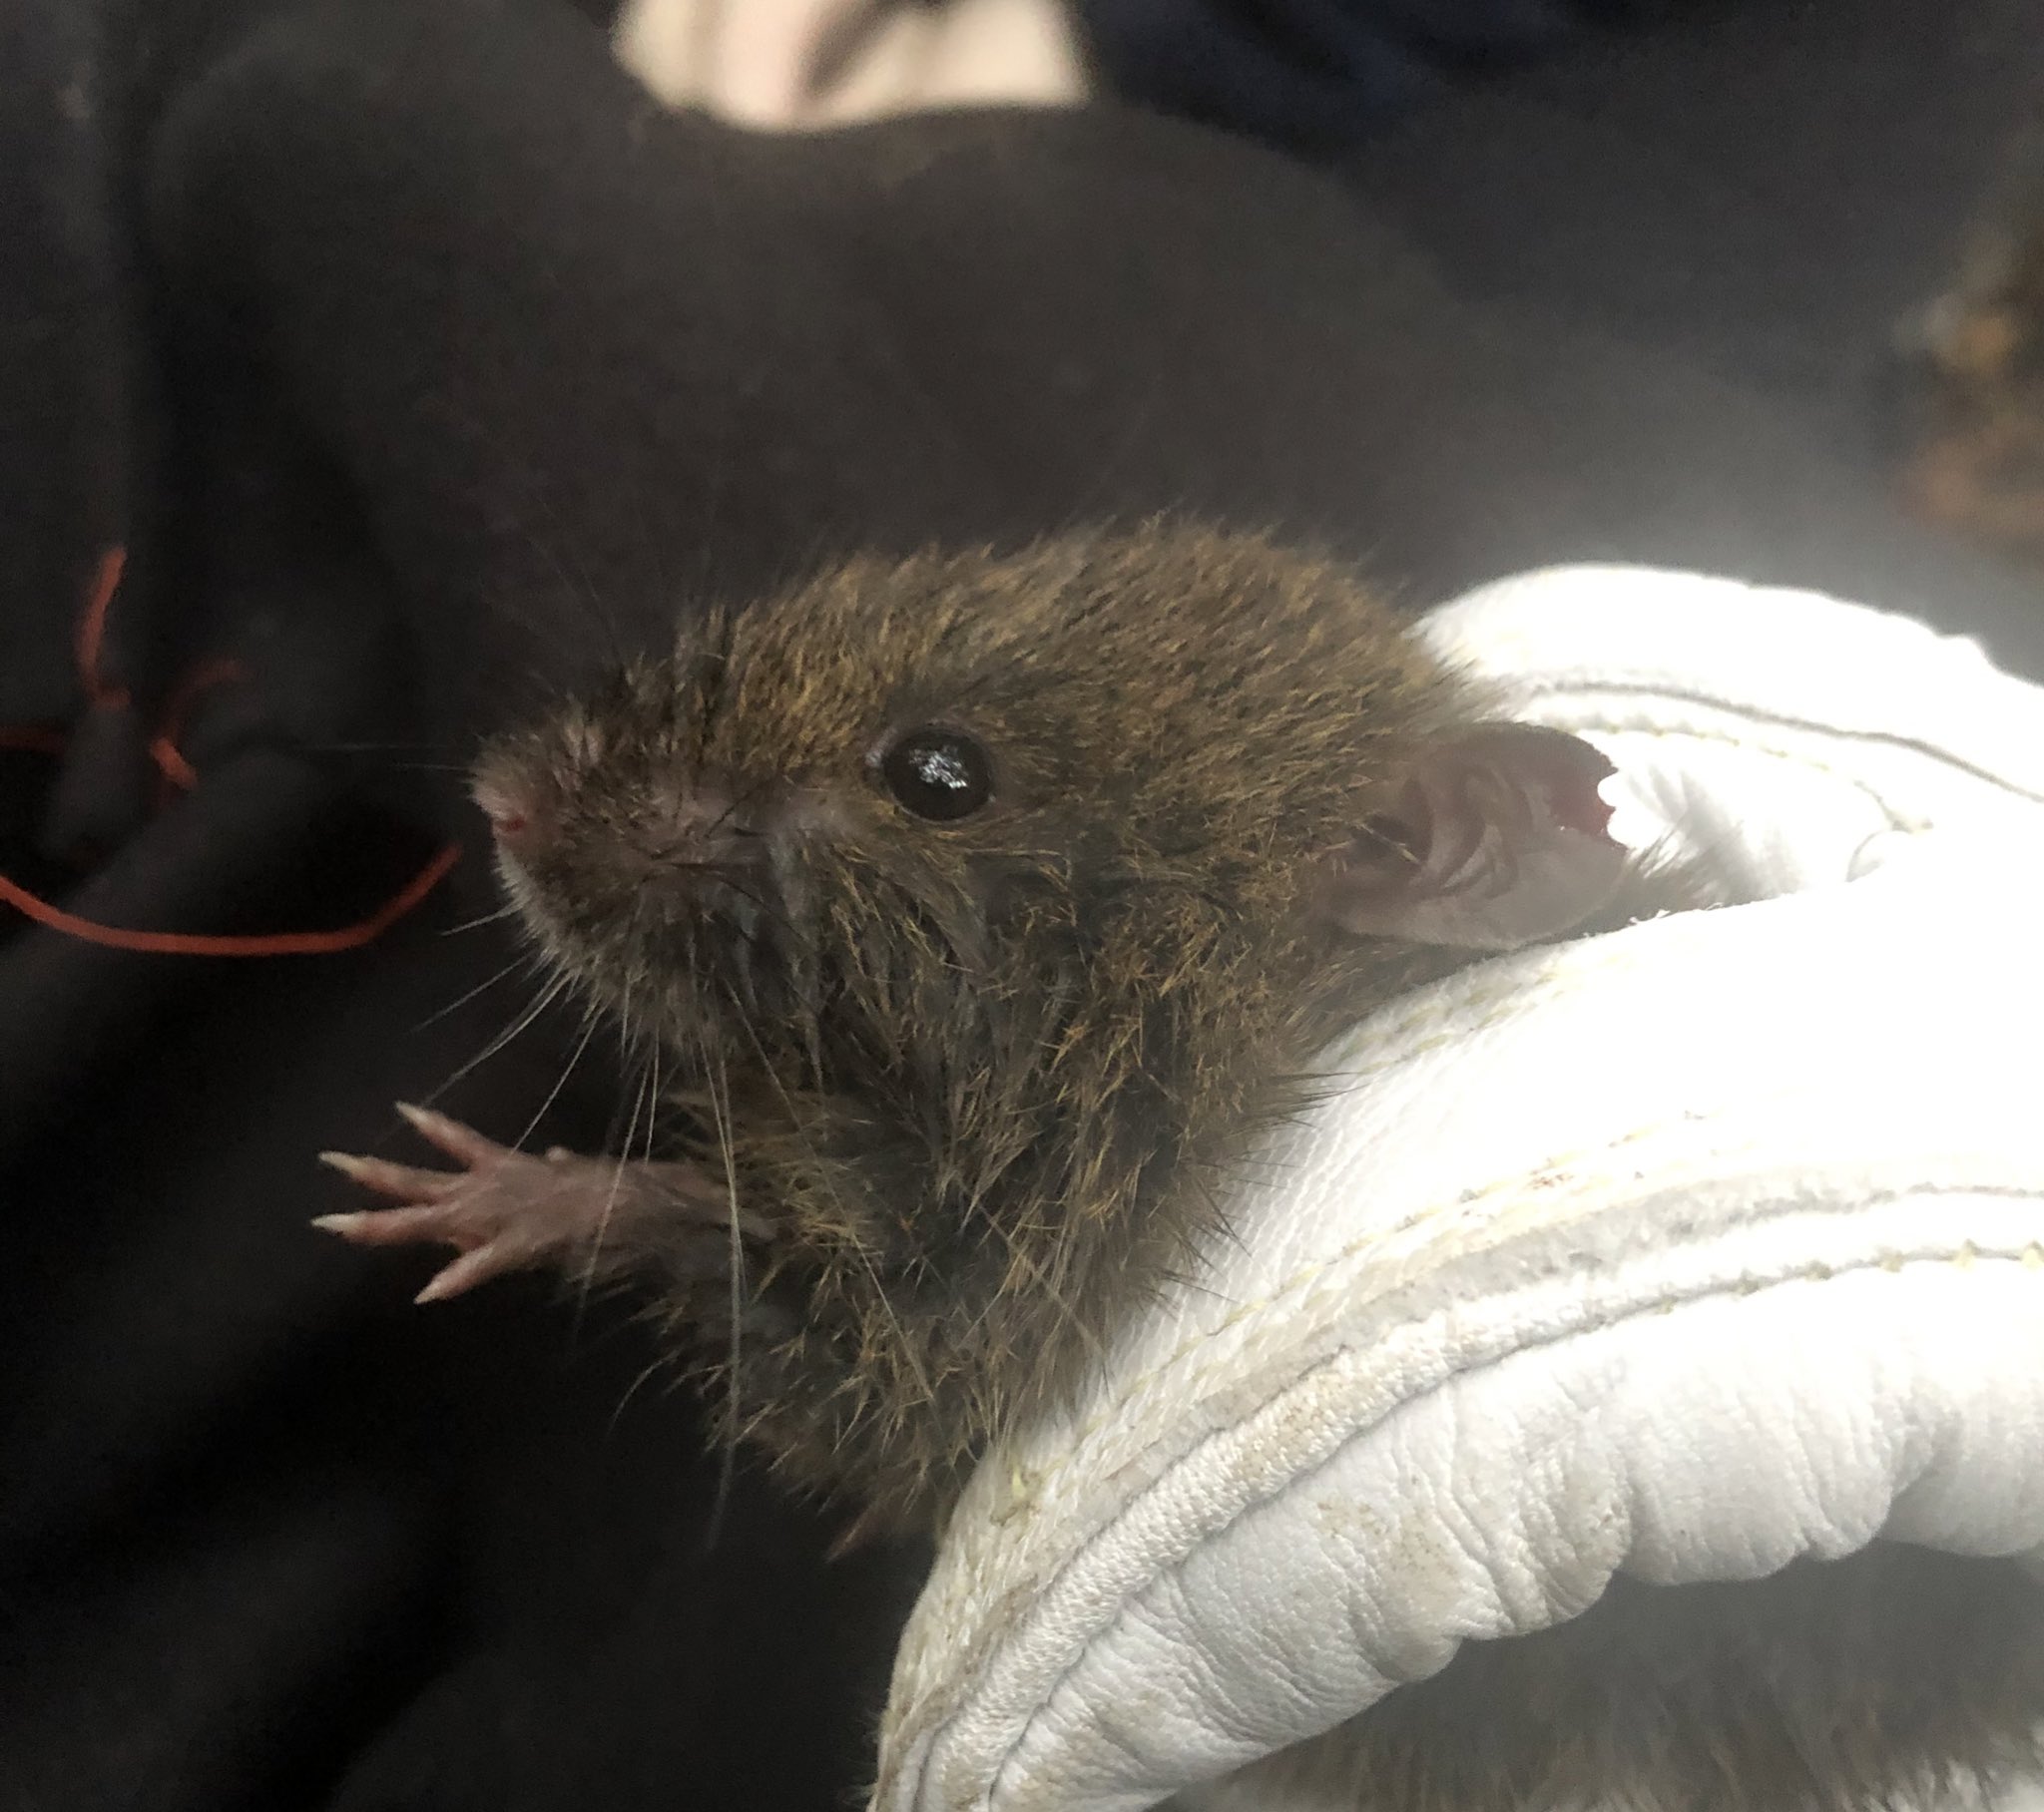 Dr Hamilton on Twitter: "This little cutie is a Australian rodent, a swamp rat They're also as velvet-furred rats in Tasmania, because they're so floofy! https://t.co/Xz24zRwfx4" / Twitter